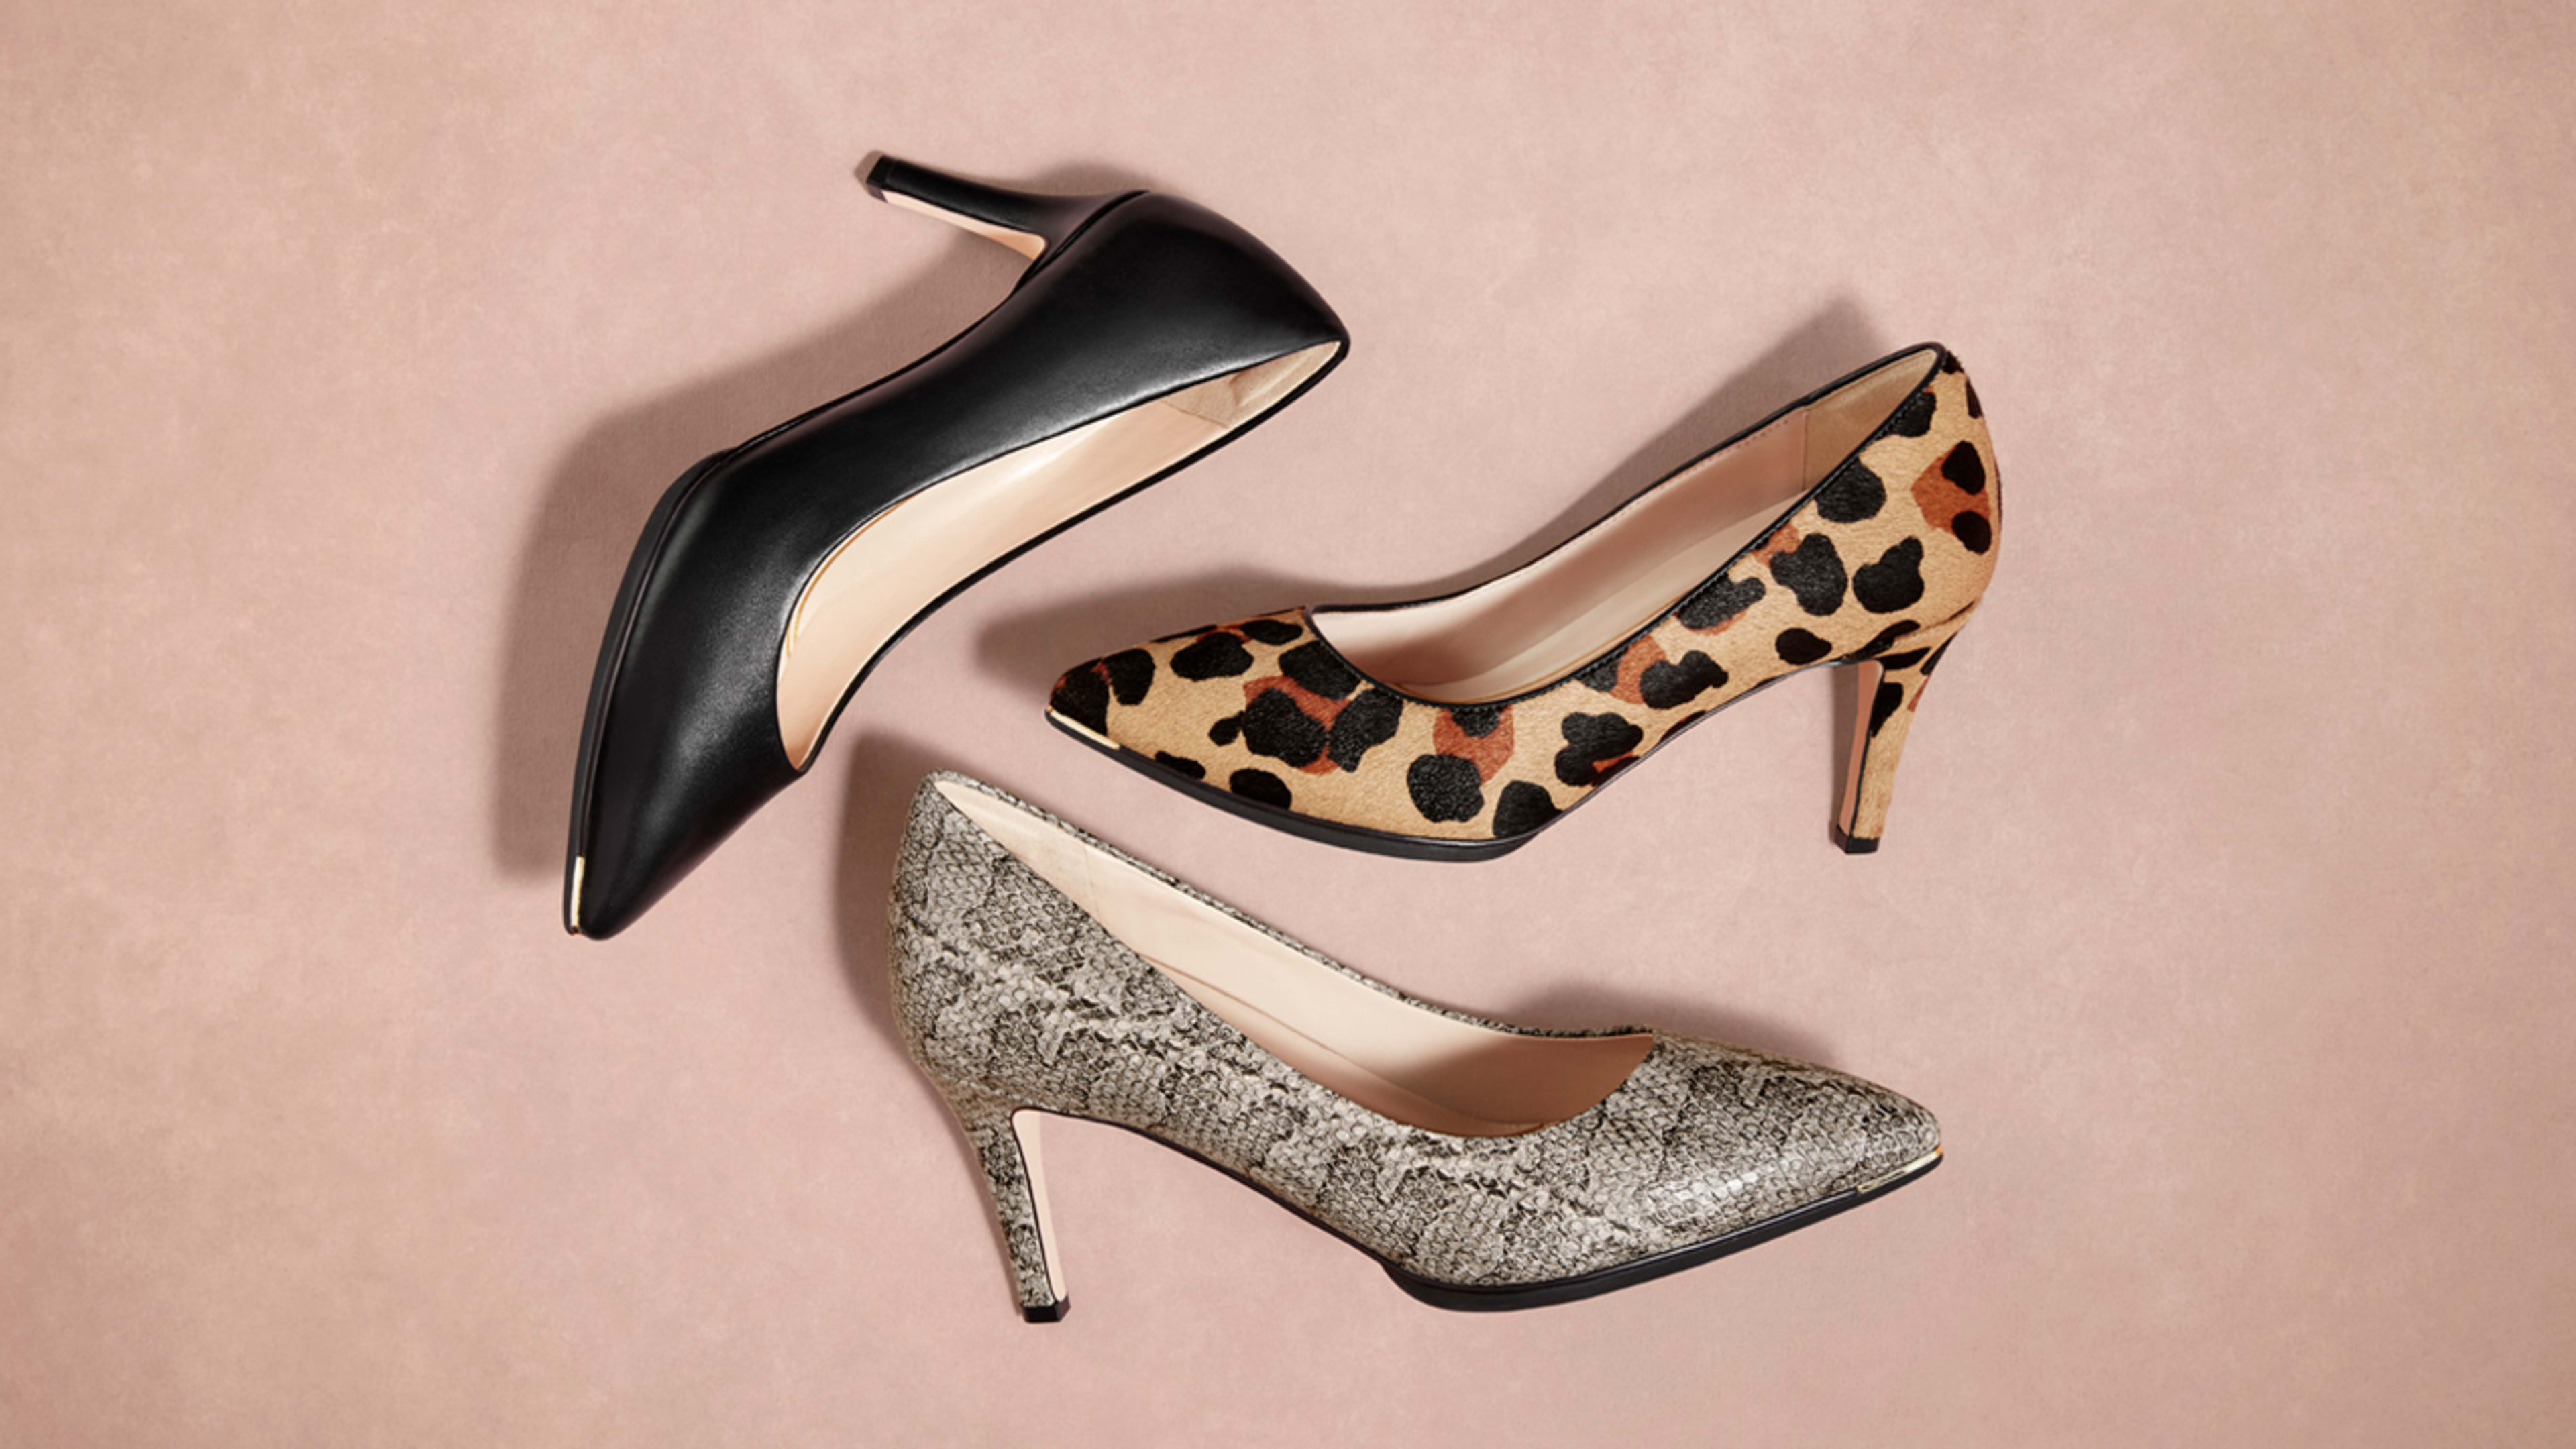 Cole Haan found a brilliant way to make high heels more comfortable